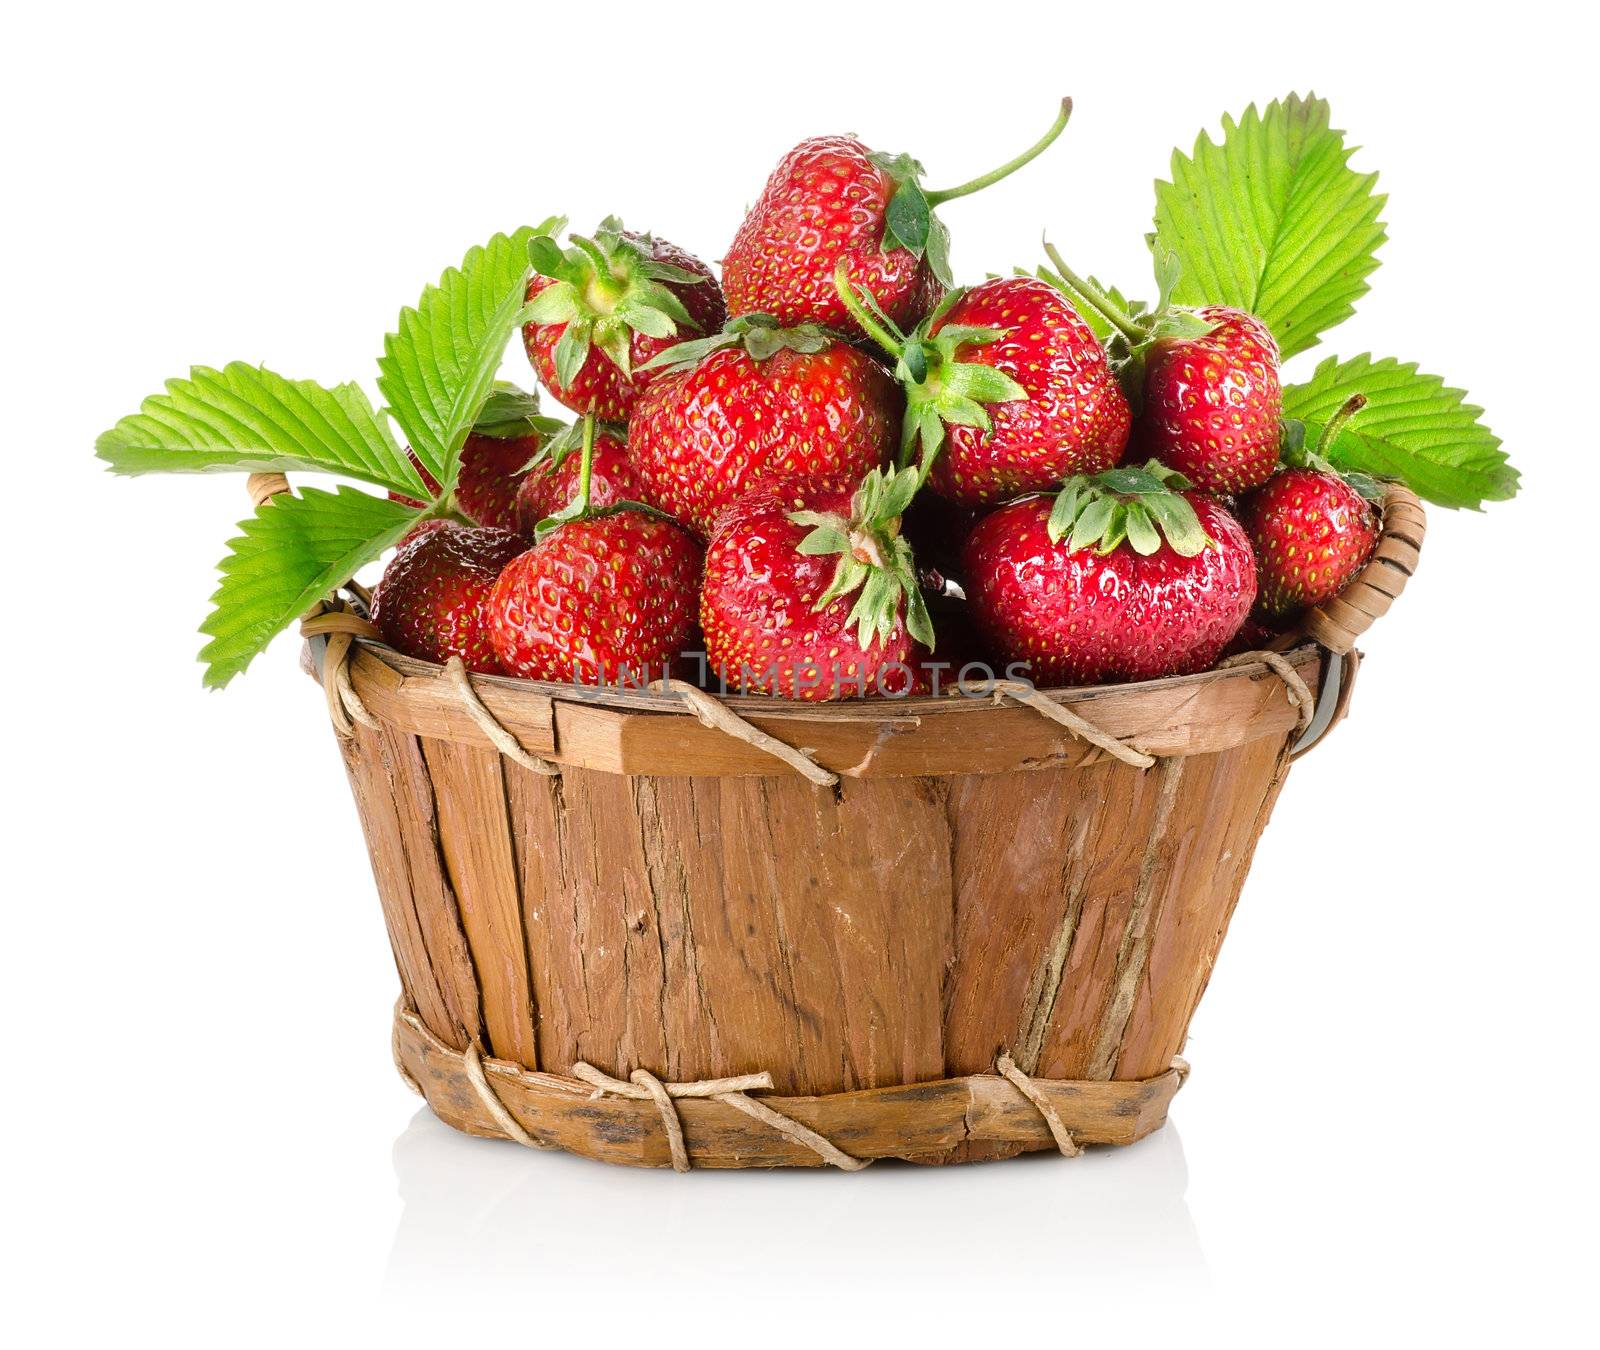 Strawberries in a basket by Givaga